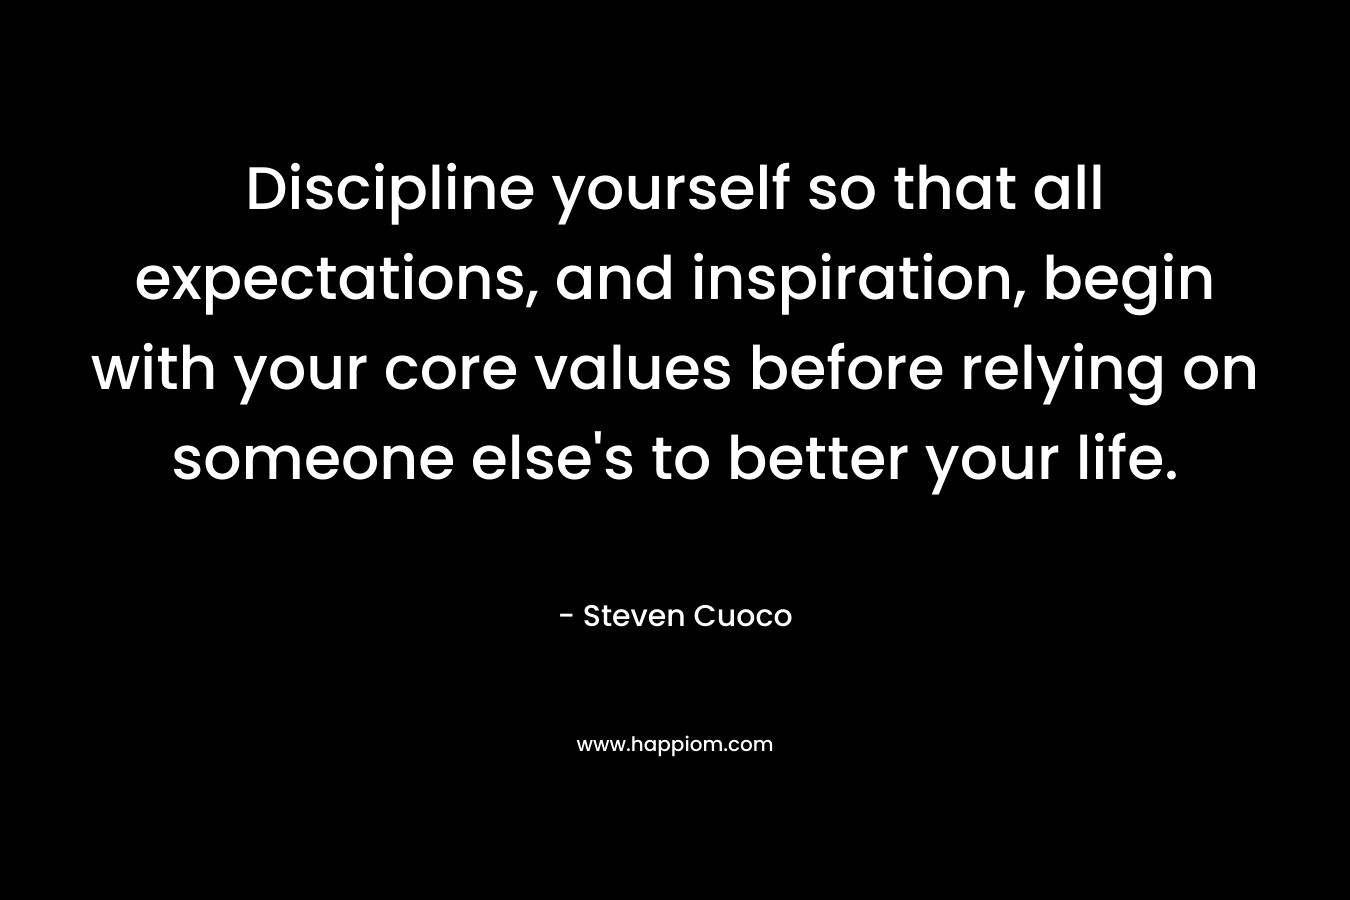 Discipline yourself so that all expectations, and inspiration, begin with your core values before relying on someone else's to better your life.